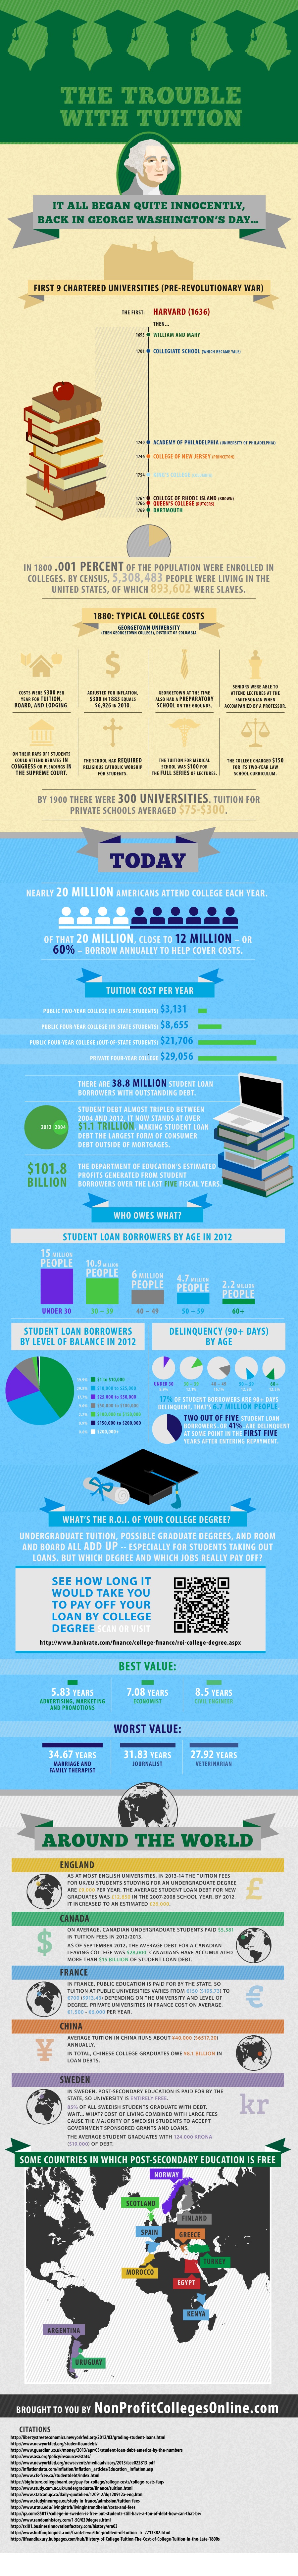 The US College Tuition Business